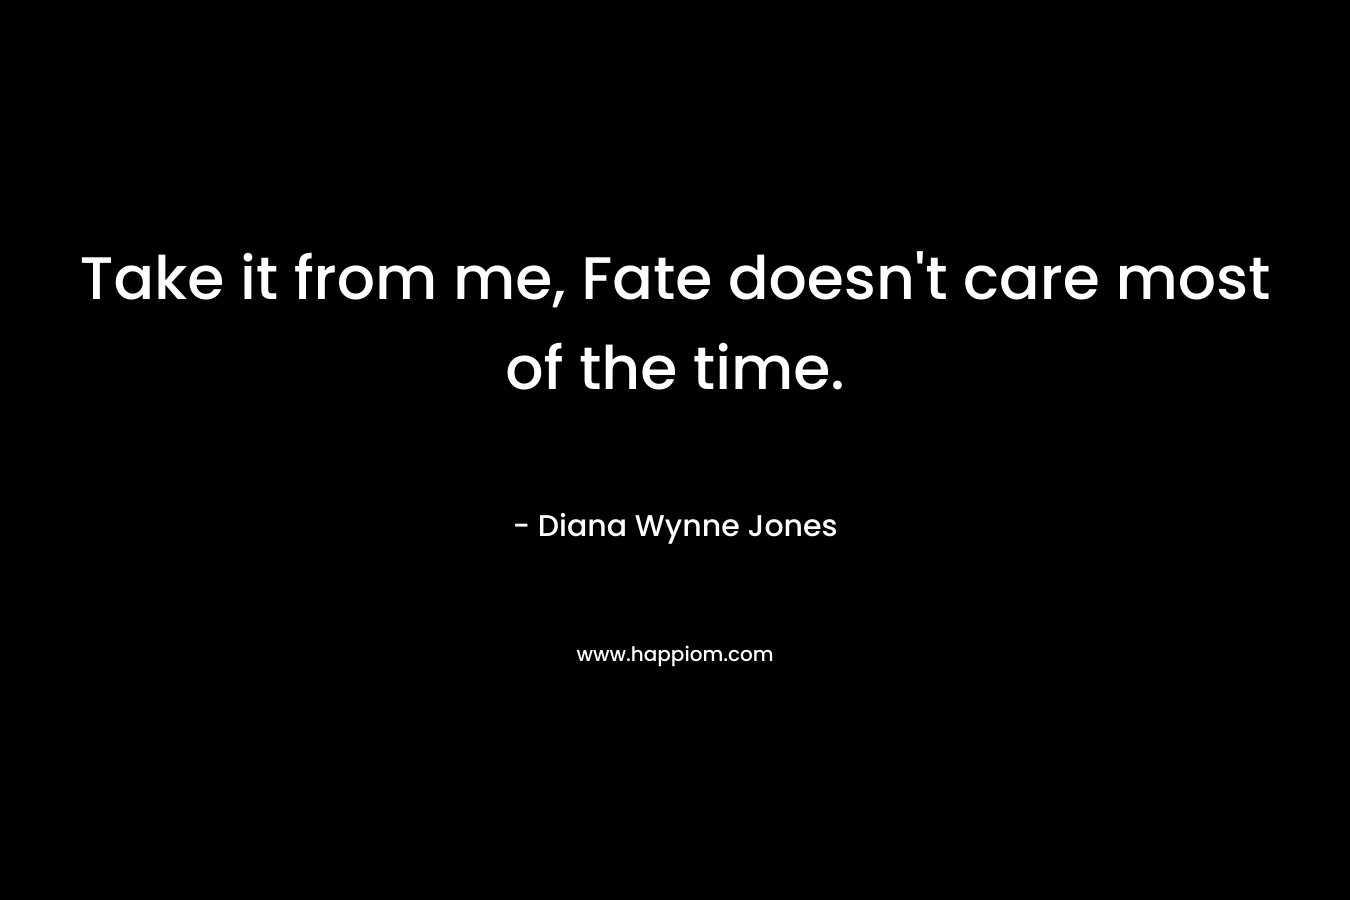 Take it from me, Fate doesn’t care most of the time. – Diana Wynne Jones